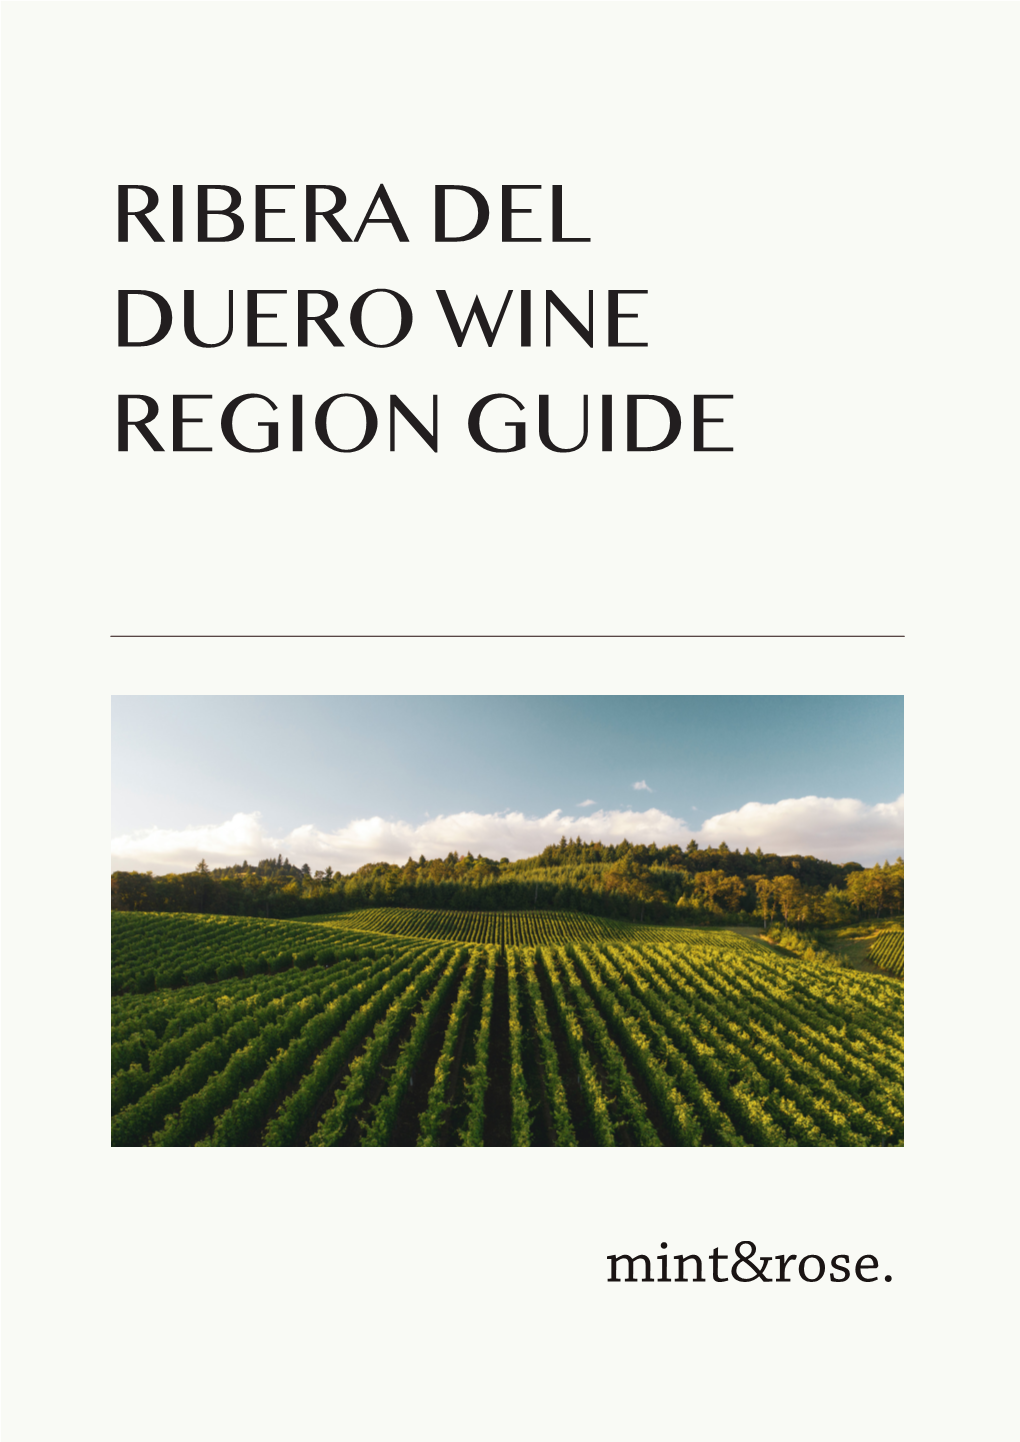 RIBERA DEL DUERO WINE REGION GUIDE Wineries Are Reinventing Themselves to Attract More and More Tourists